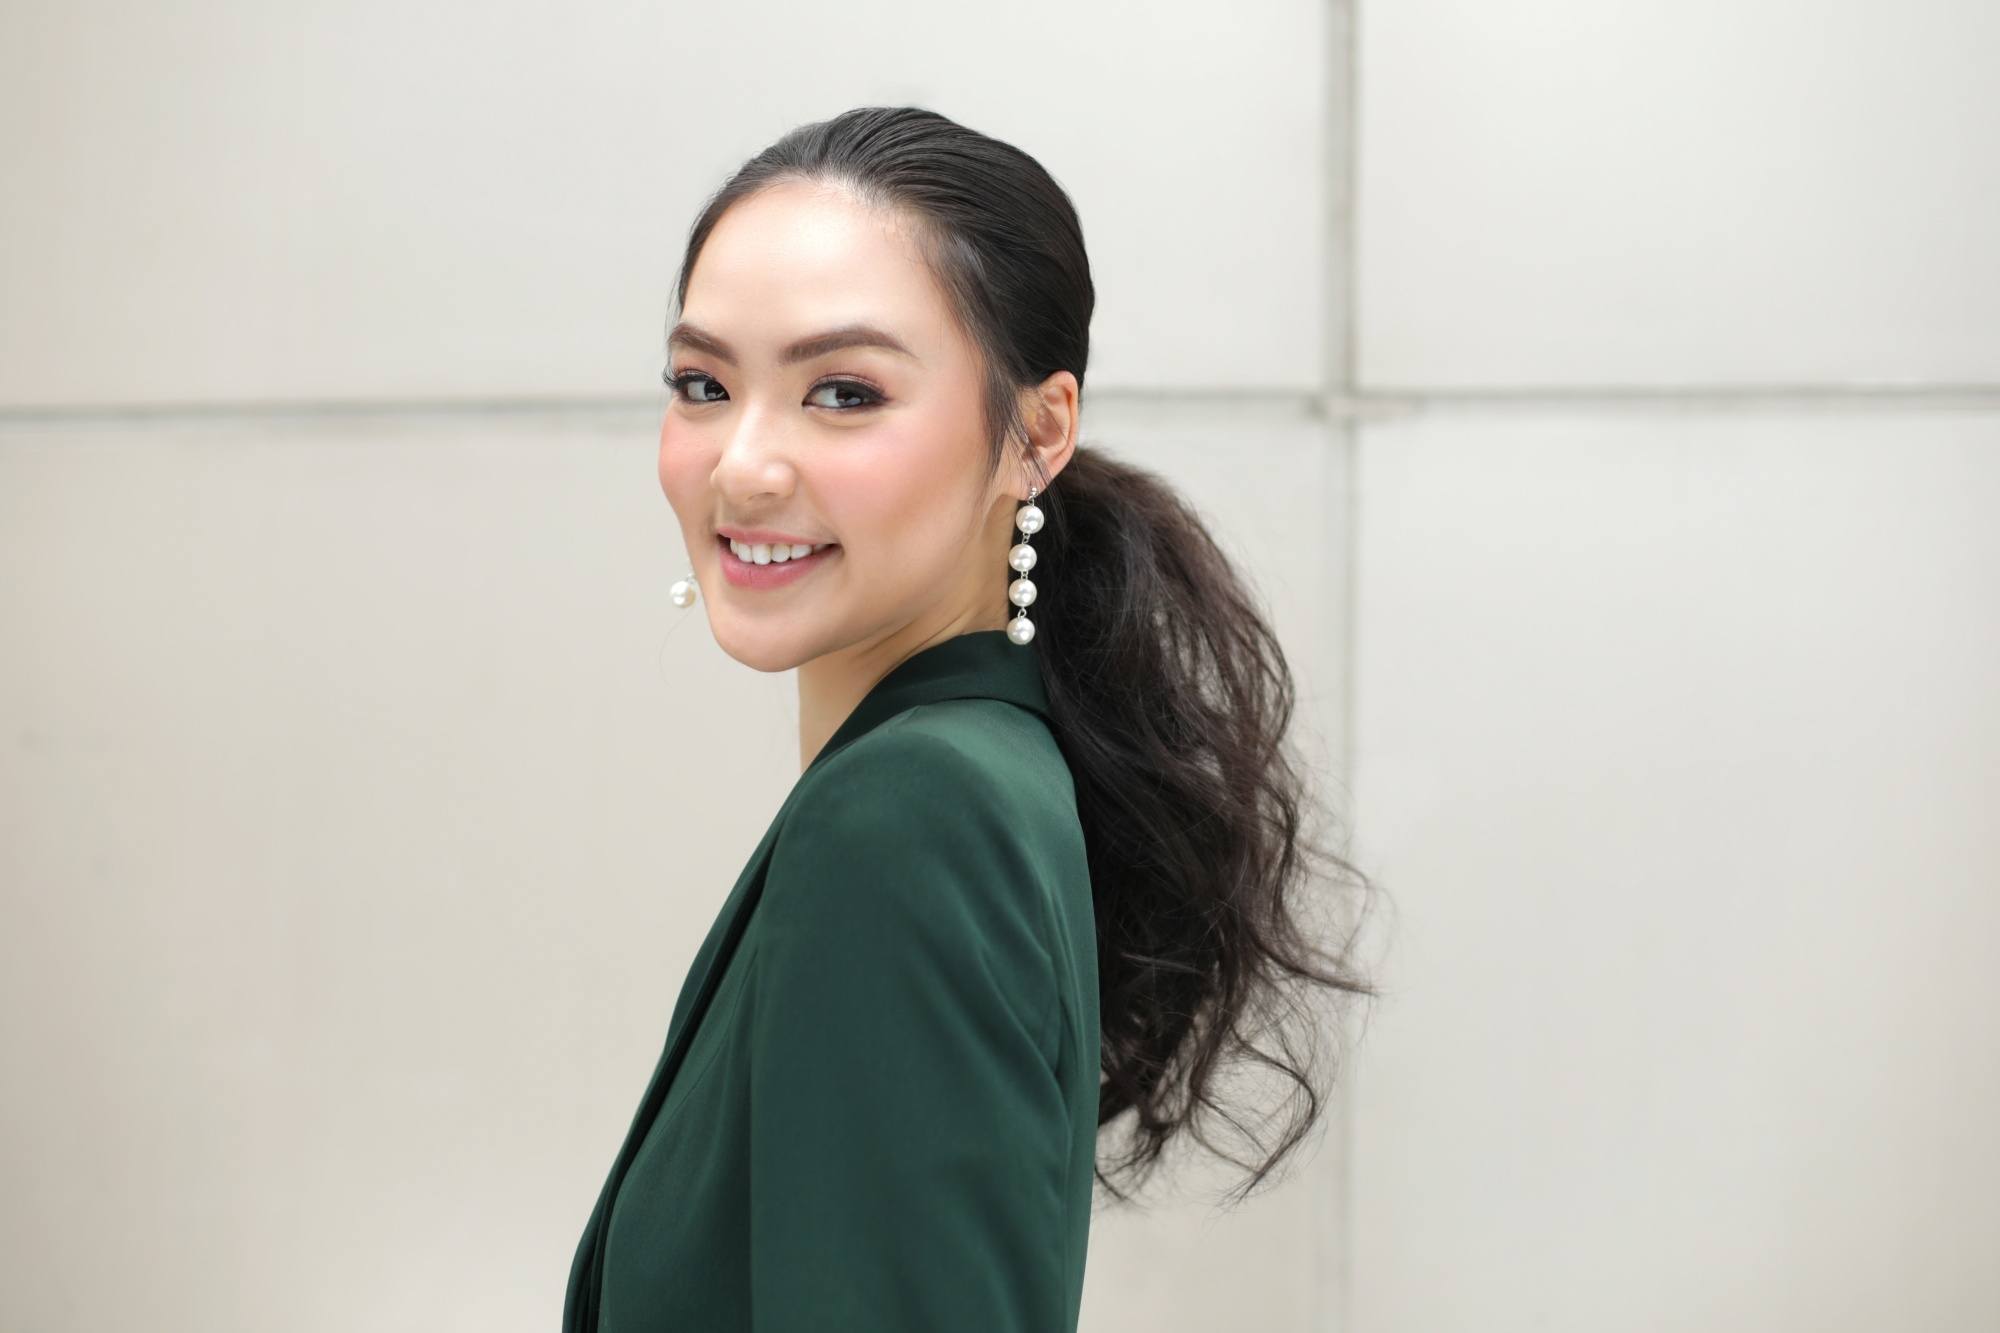 Asian woman with tousled ponytail wearing a dark green blouse